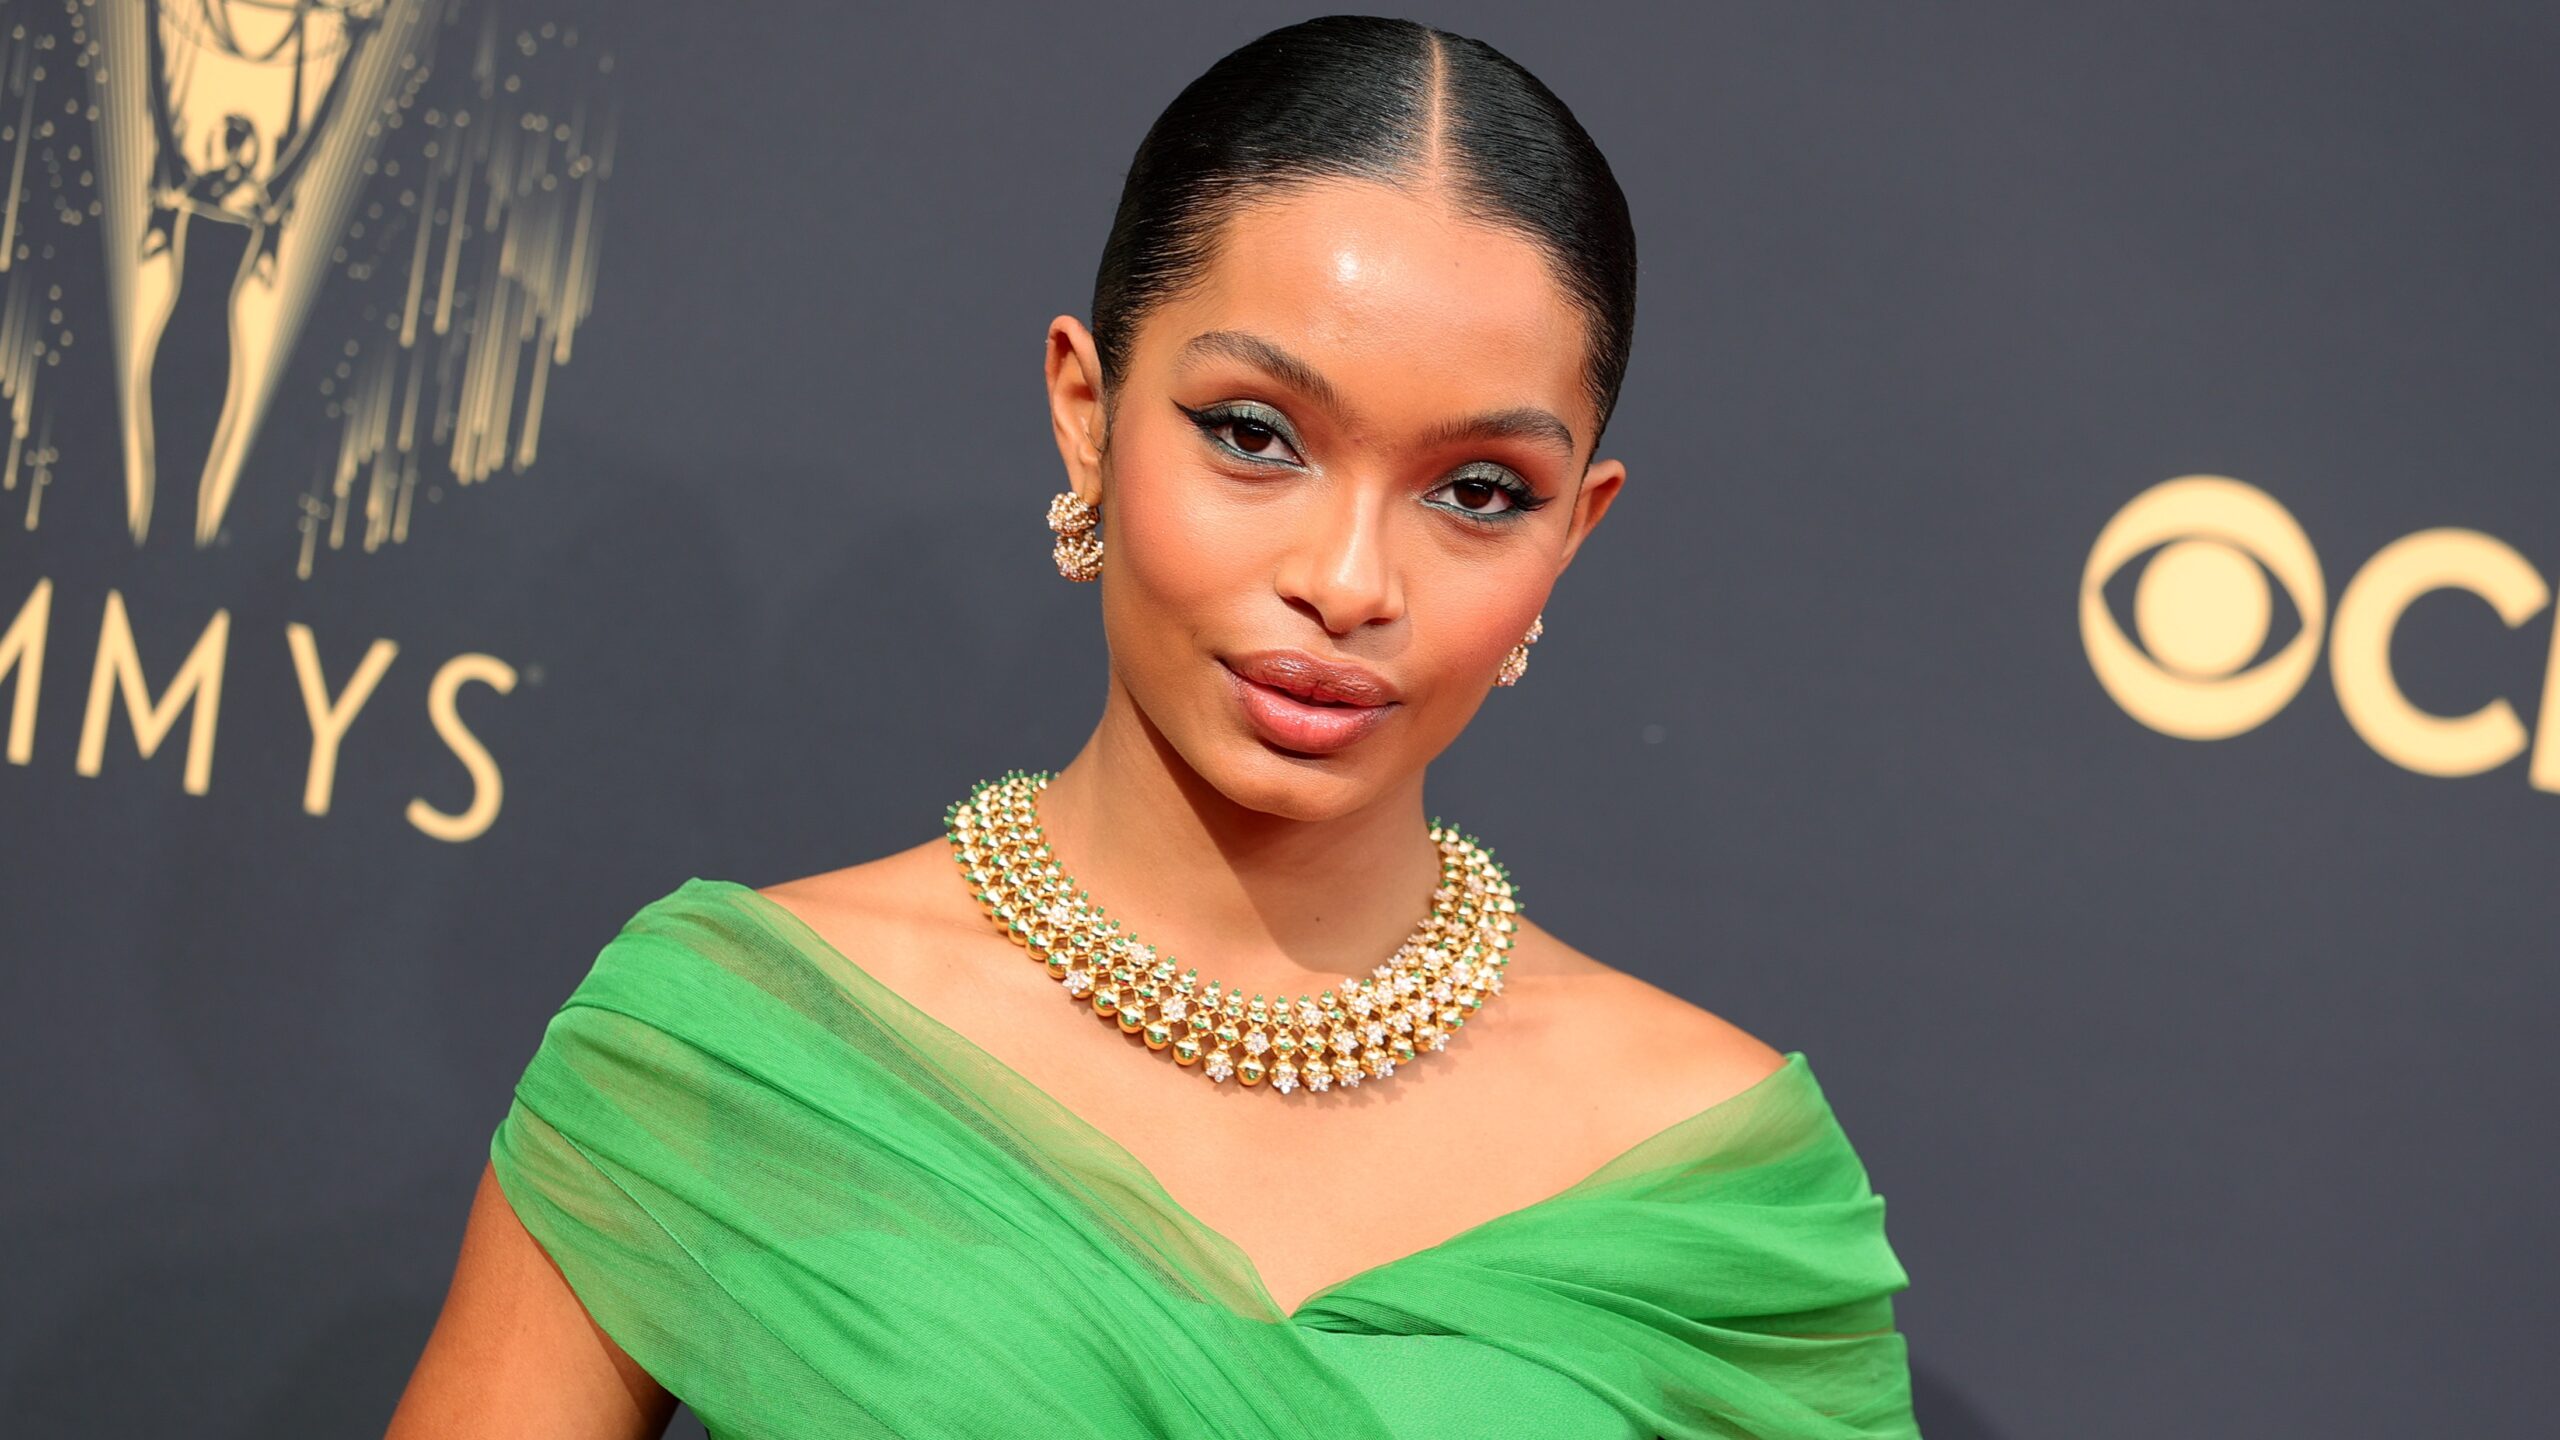 Here’s Why Yara Shahidi Requested To Present Early At The 2021 Emmys